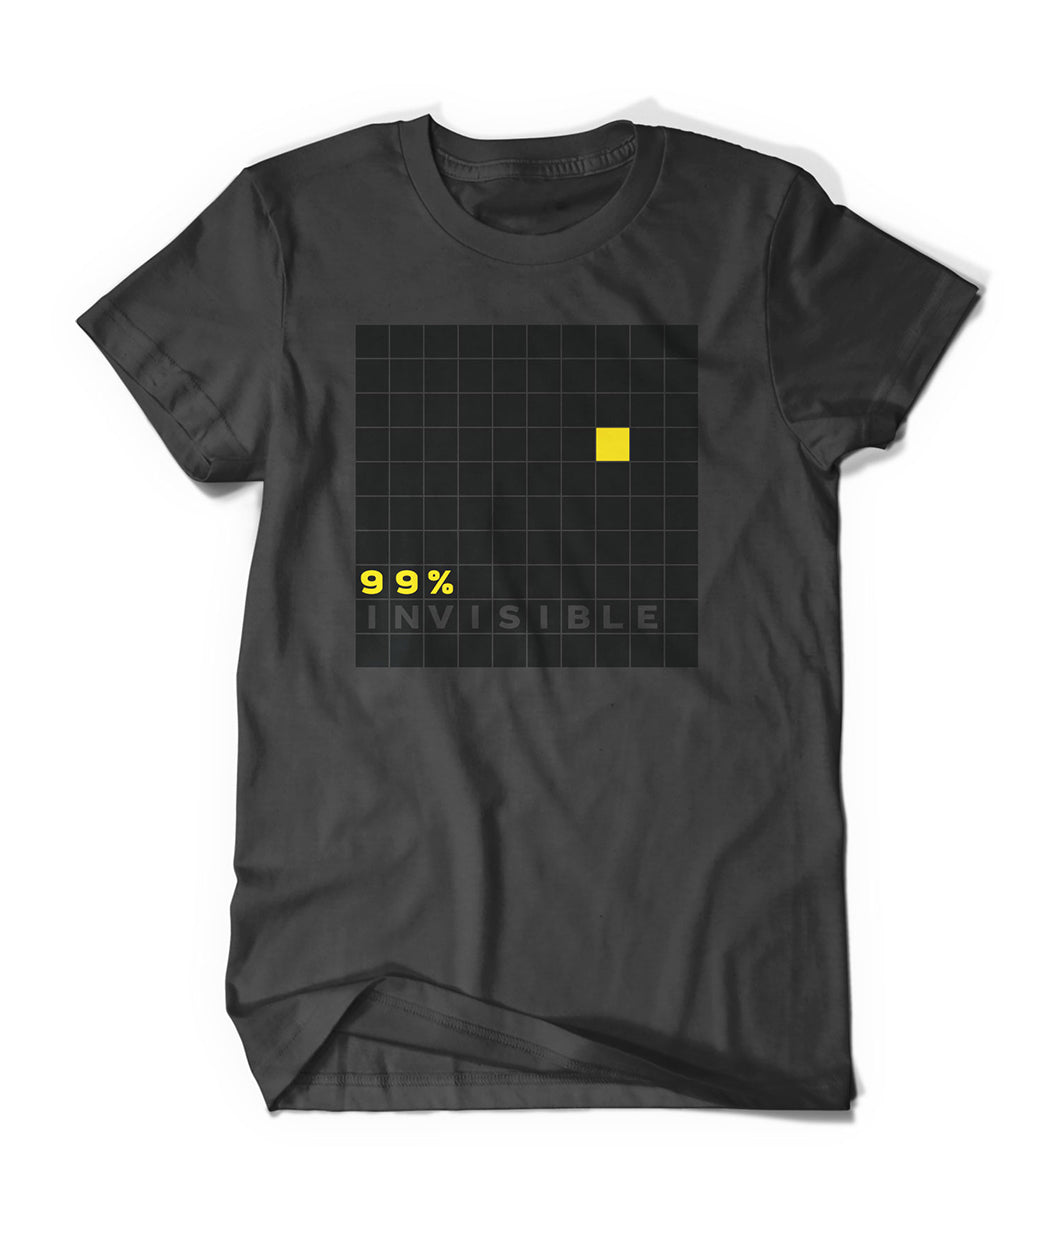 Grey t-shirt with large grid of all black squares except for 1 yellow and the words 